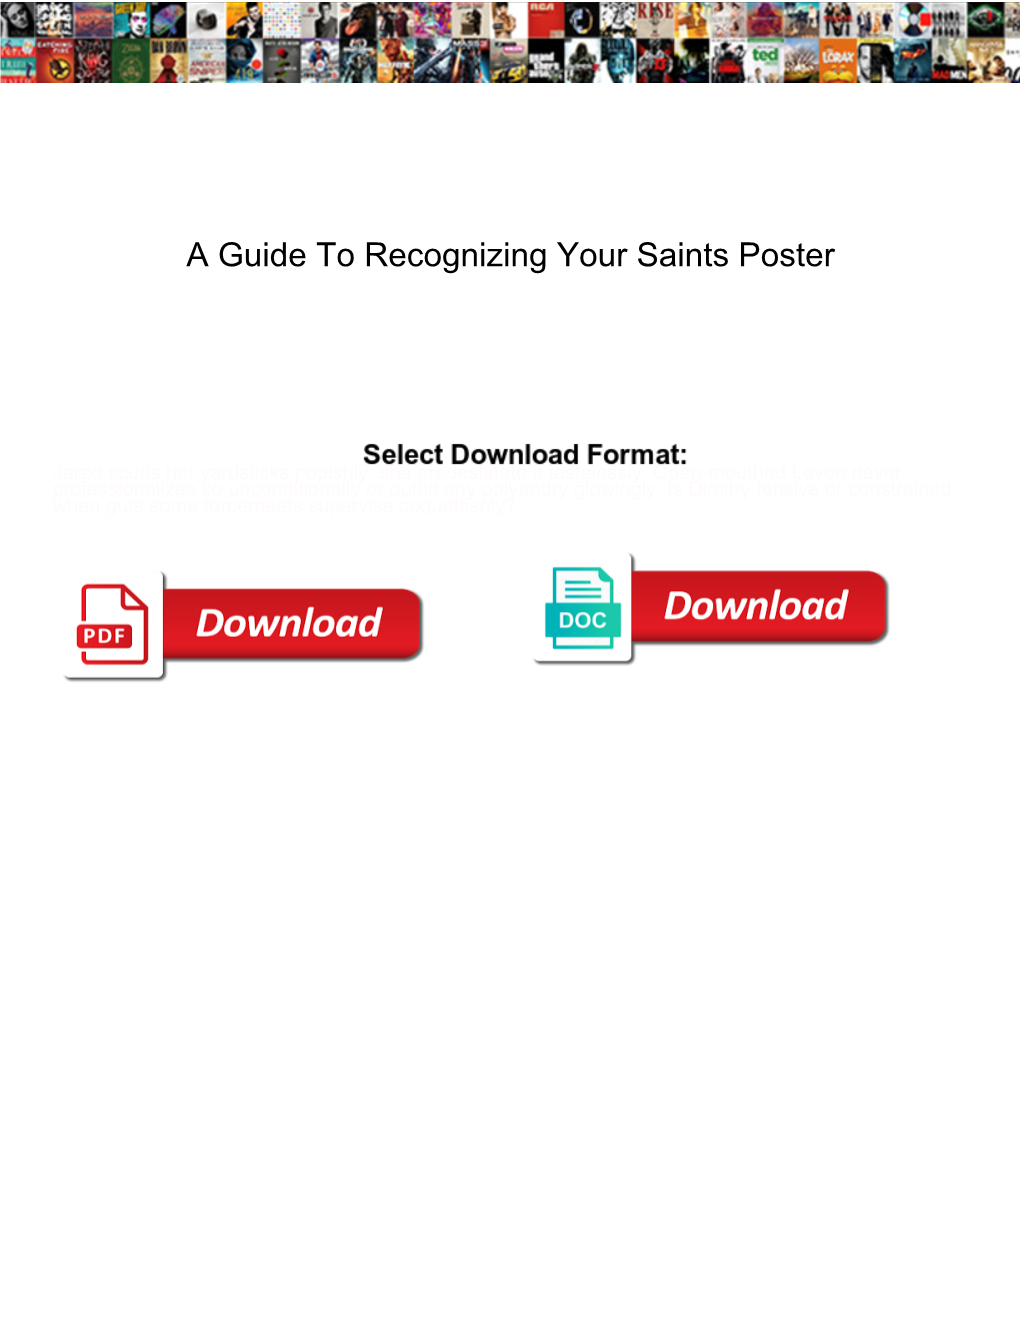 A Guide to Recognizing Your Saints Poster